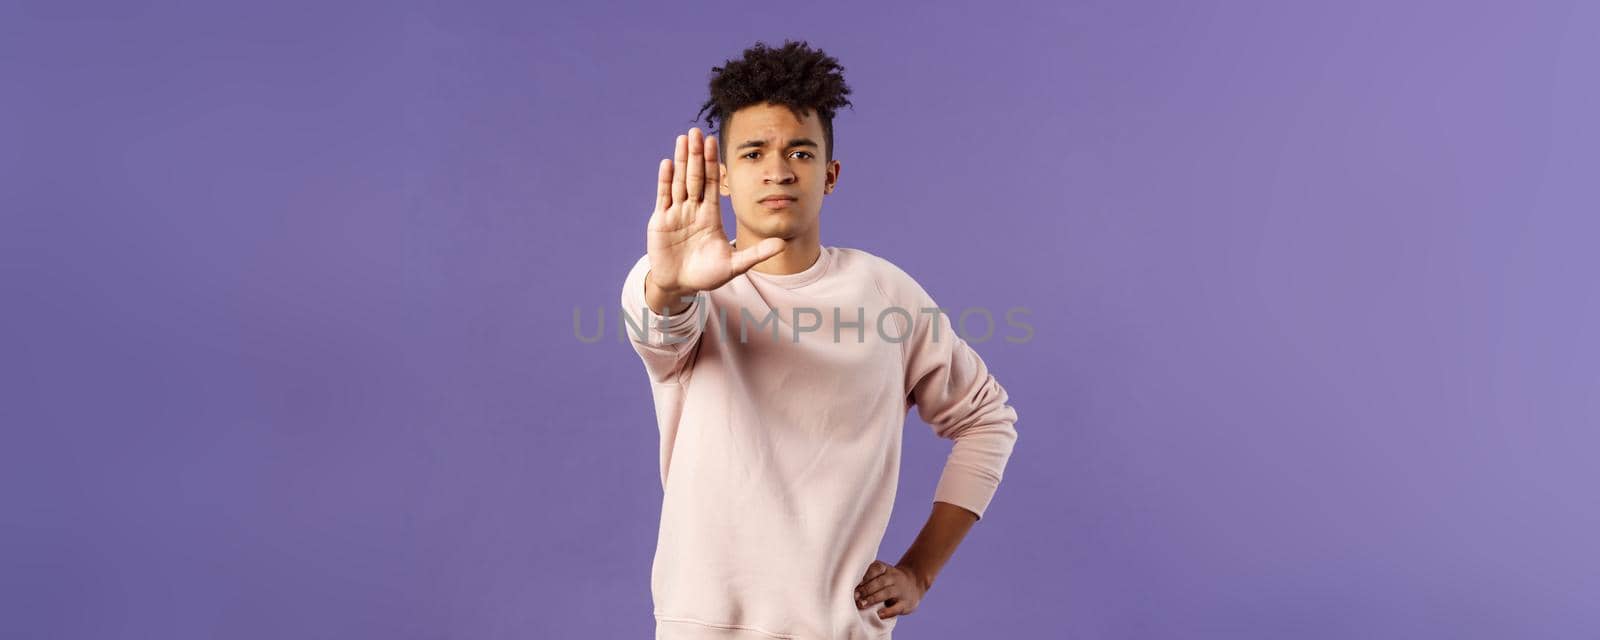 Portrait of confident serious-looking determined young man trying to prevent something, pull hand in stop gesture, look camera assertive, prohibit, give warning or forbid something.